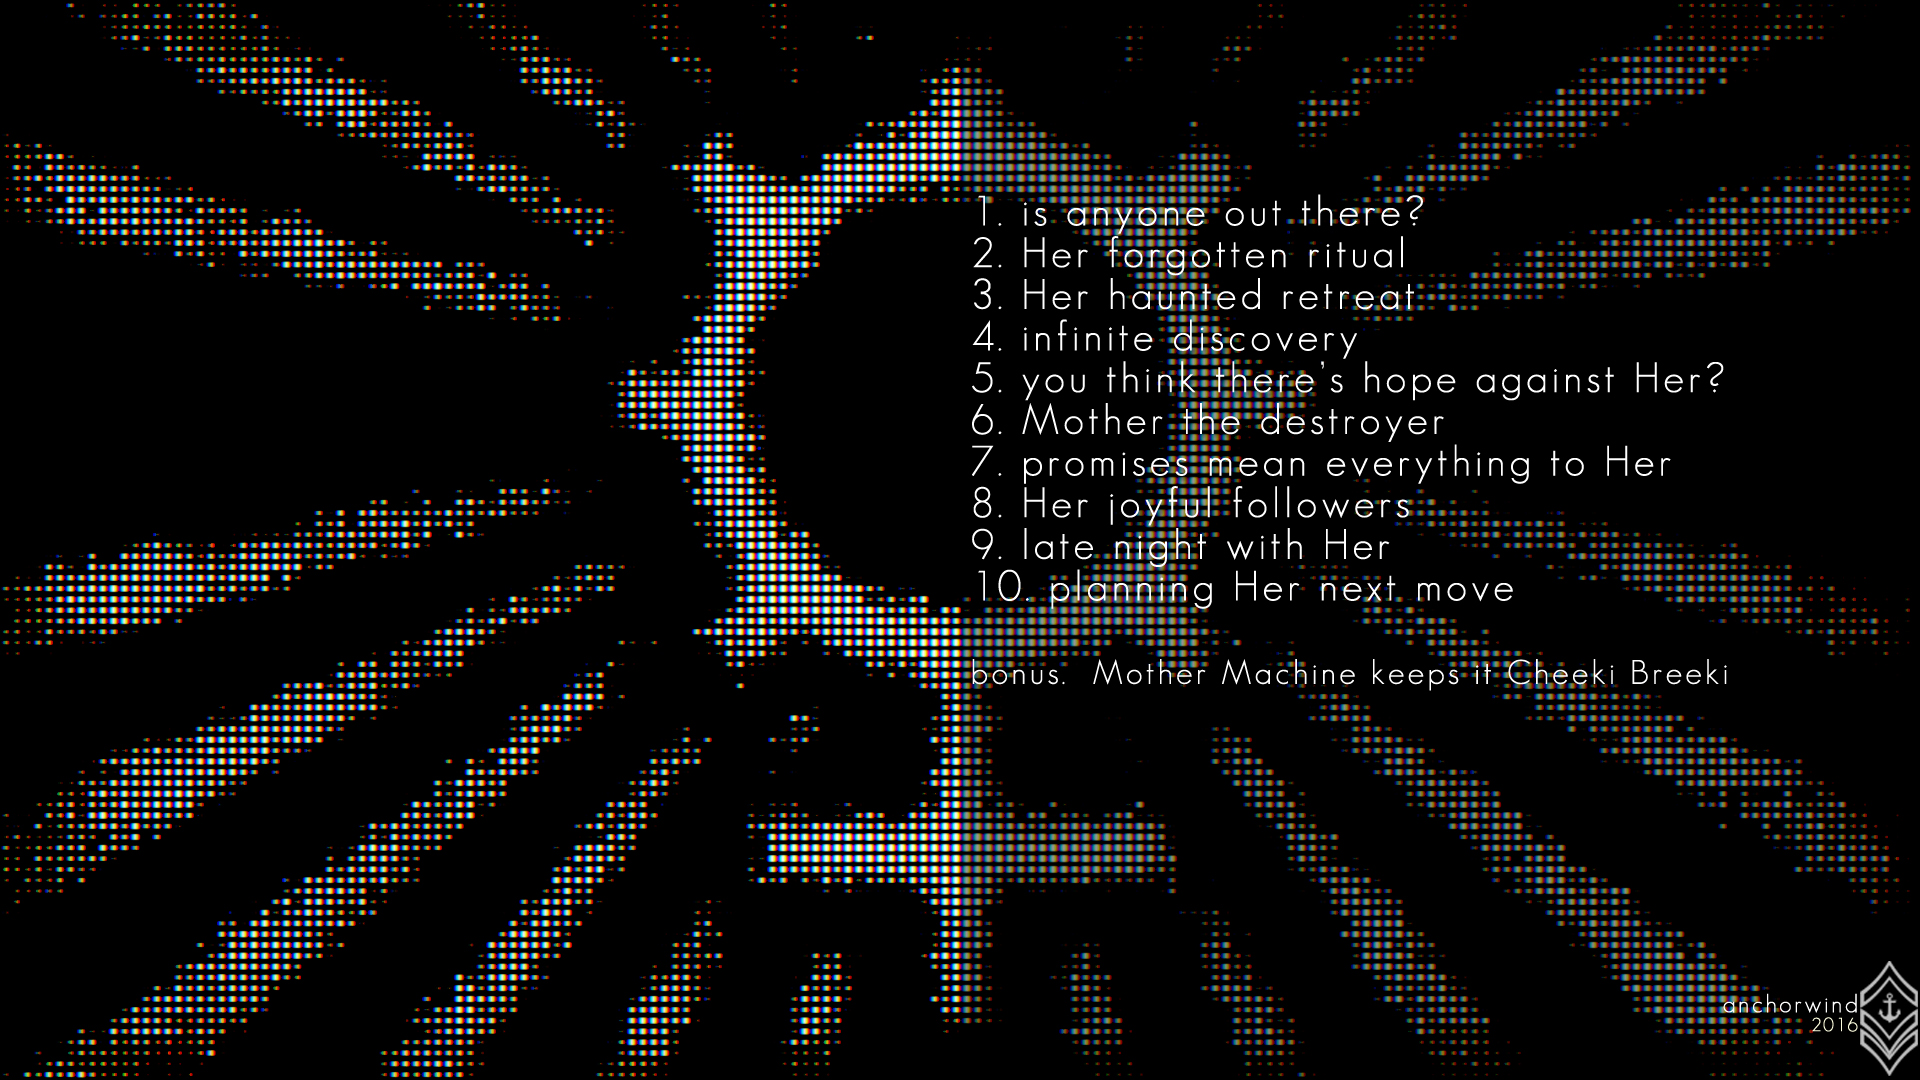 MM4 Back Cover: A Digital Art piece by Anchorwind, a disabled OIF/OEF Veteran artist, writer, and audio tinkerer.